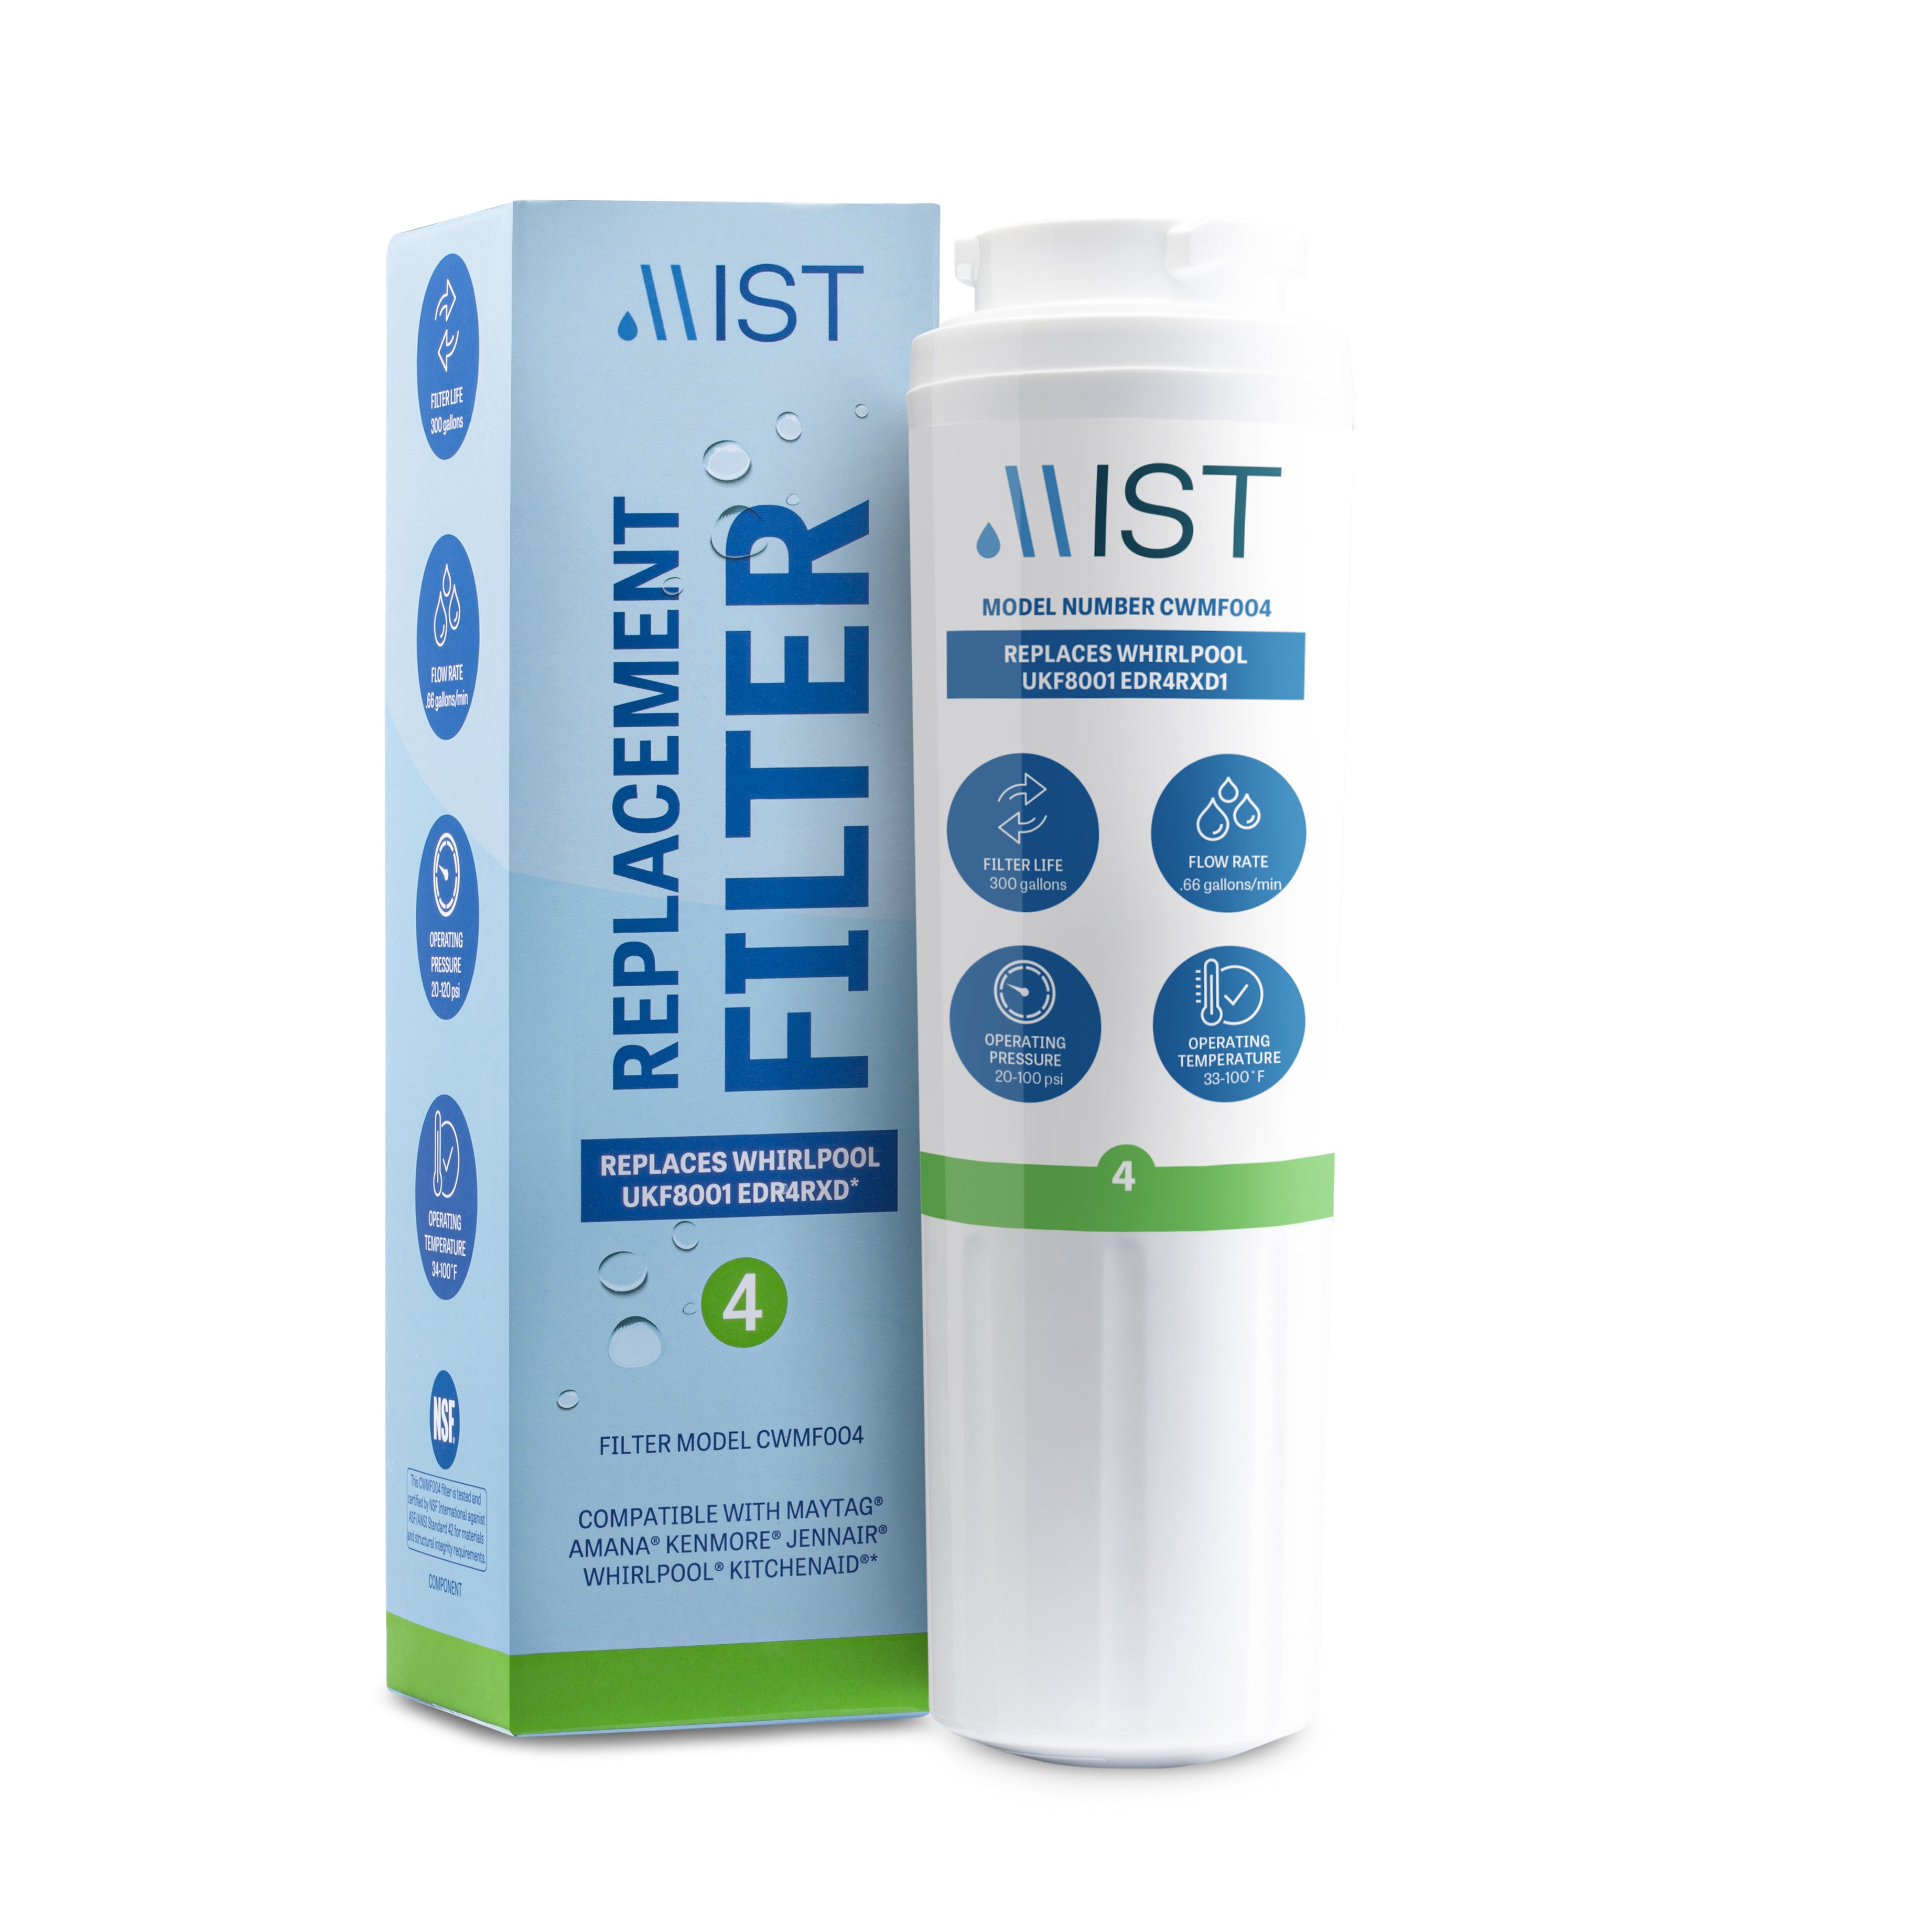 CWMF004 Water Filter Replacement | Mist Filters